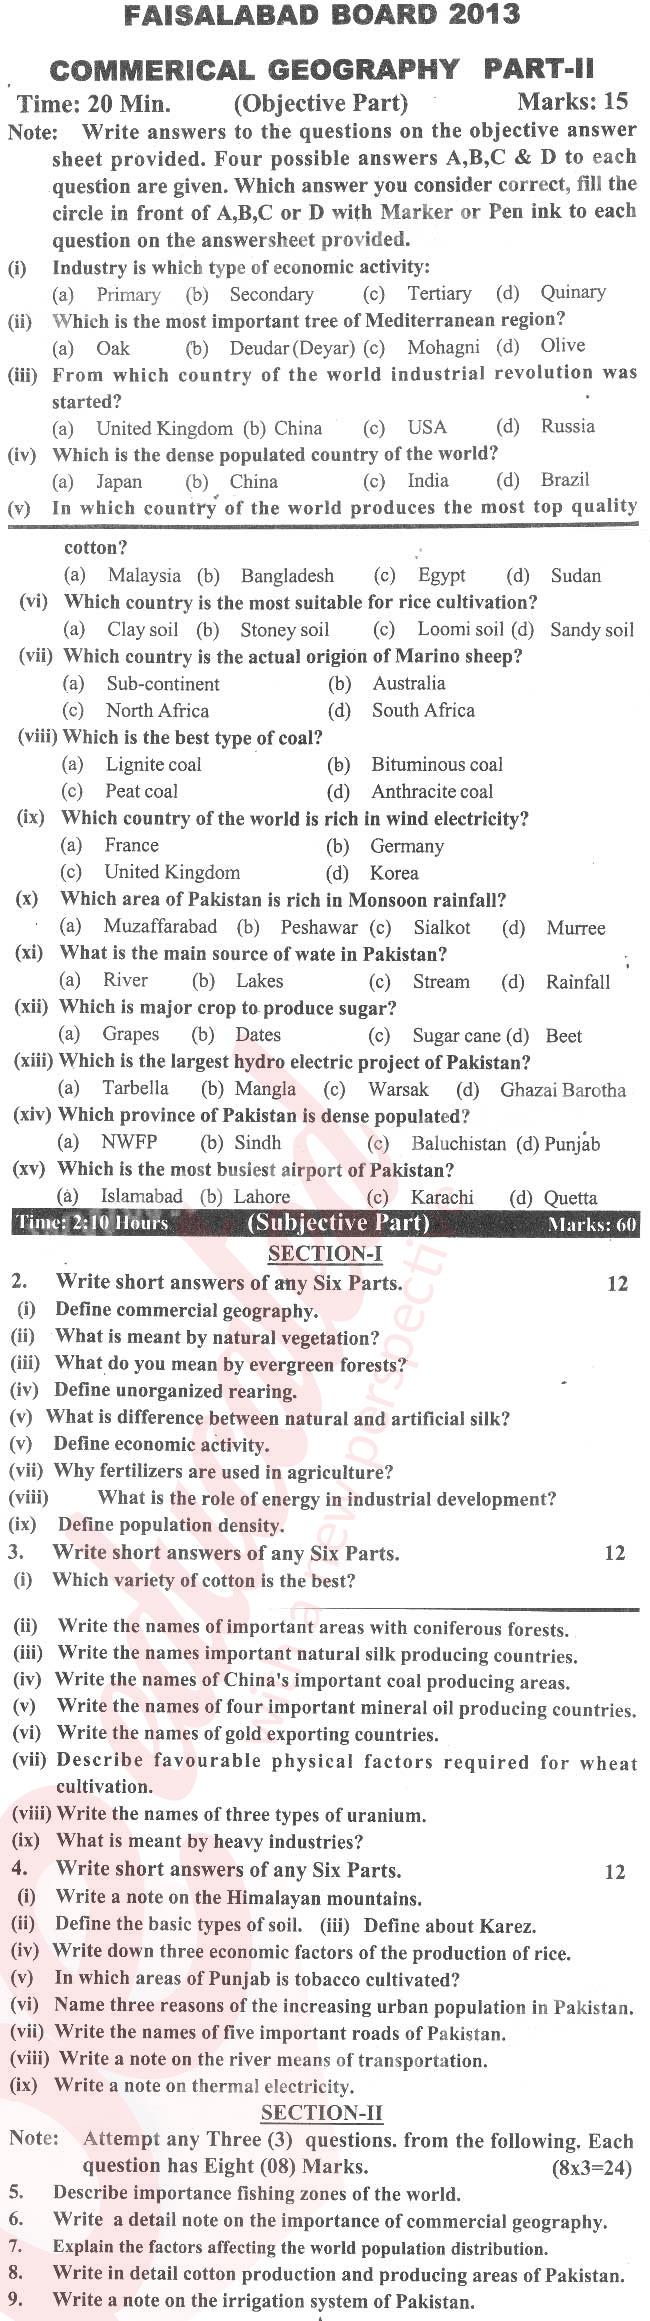 Commercial Geography ICOM Part 2 Past Paper Group 1 BISE Faisalabad 2013